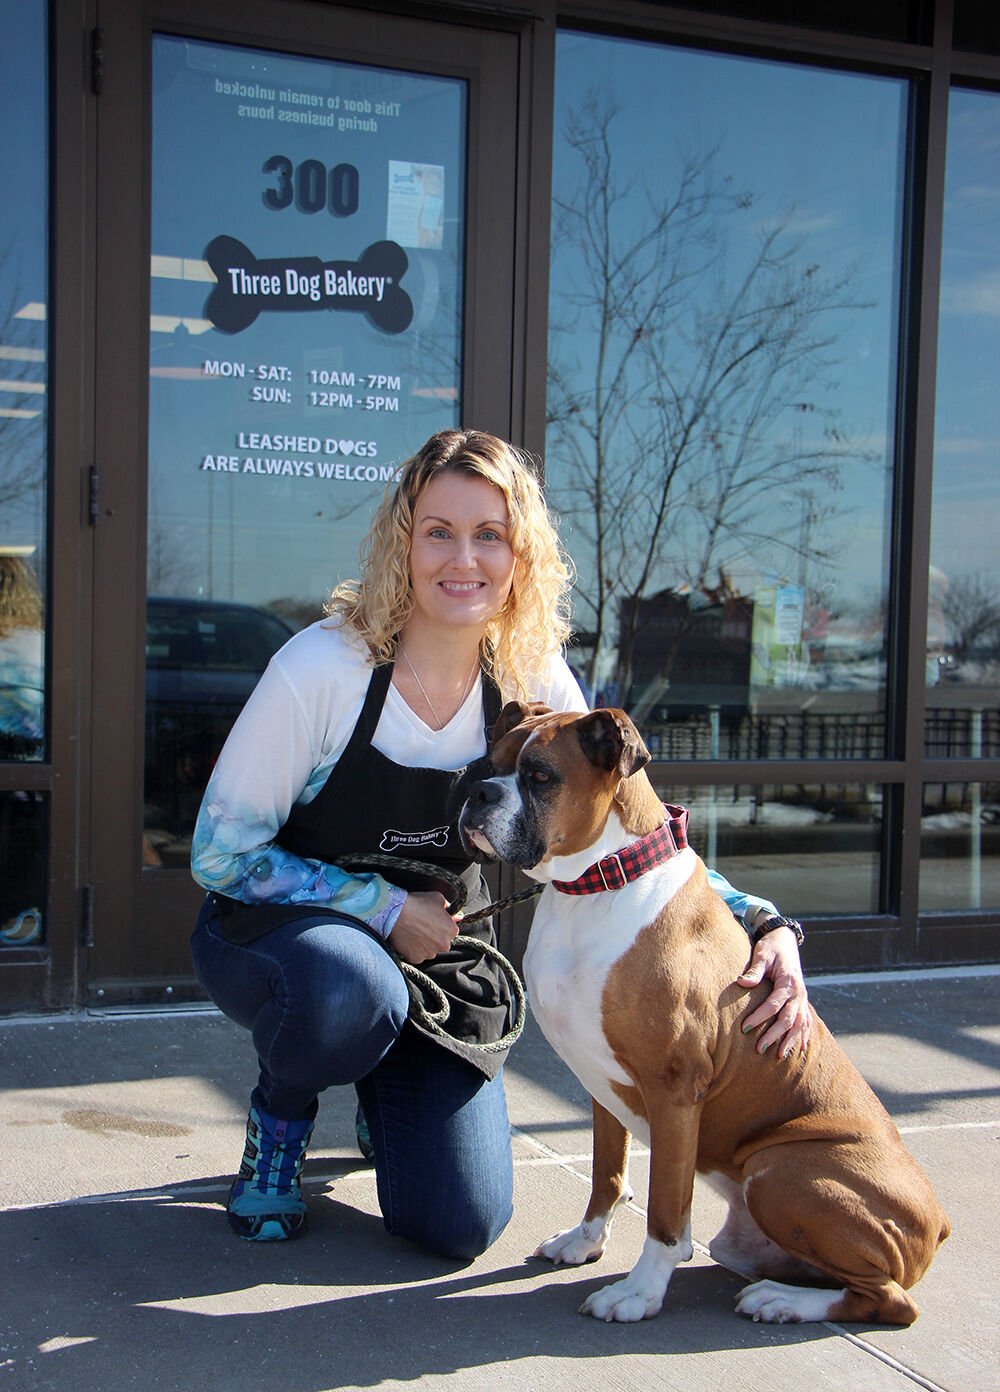 Three Dog Bakery comes to Apple Valley 